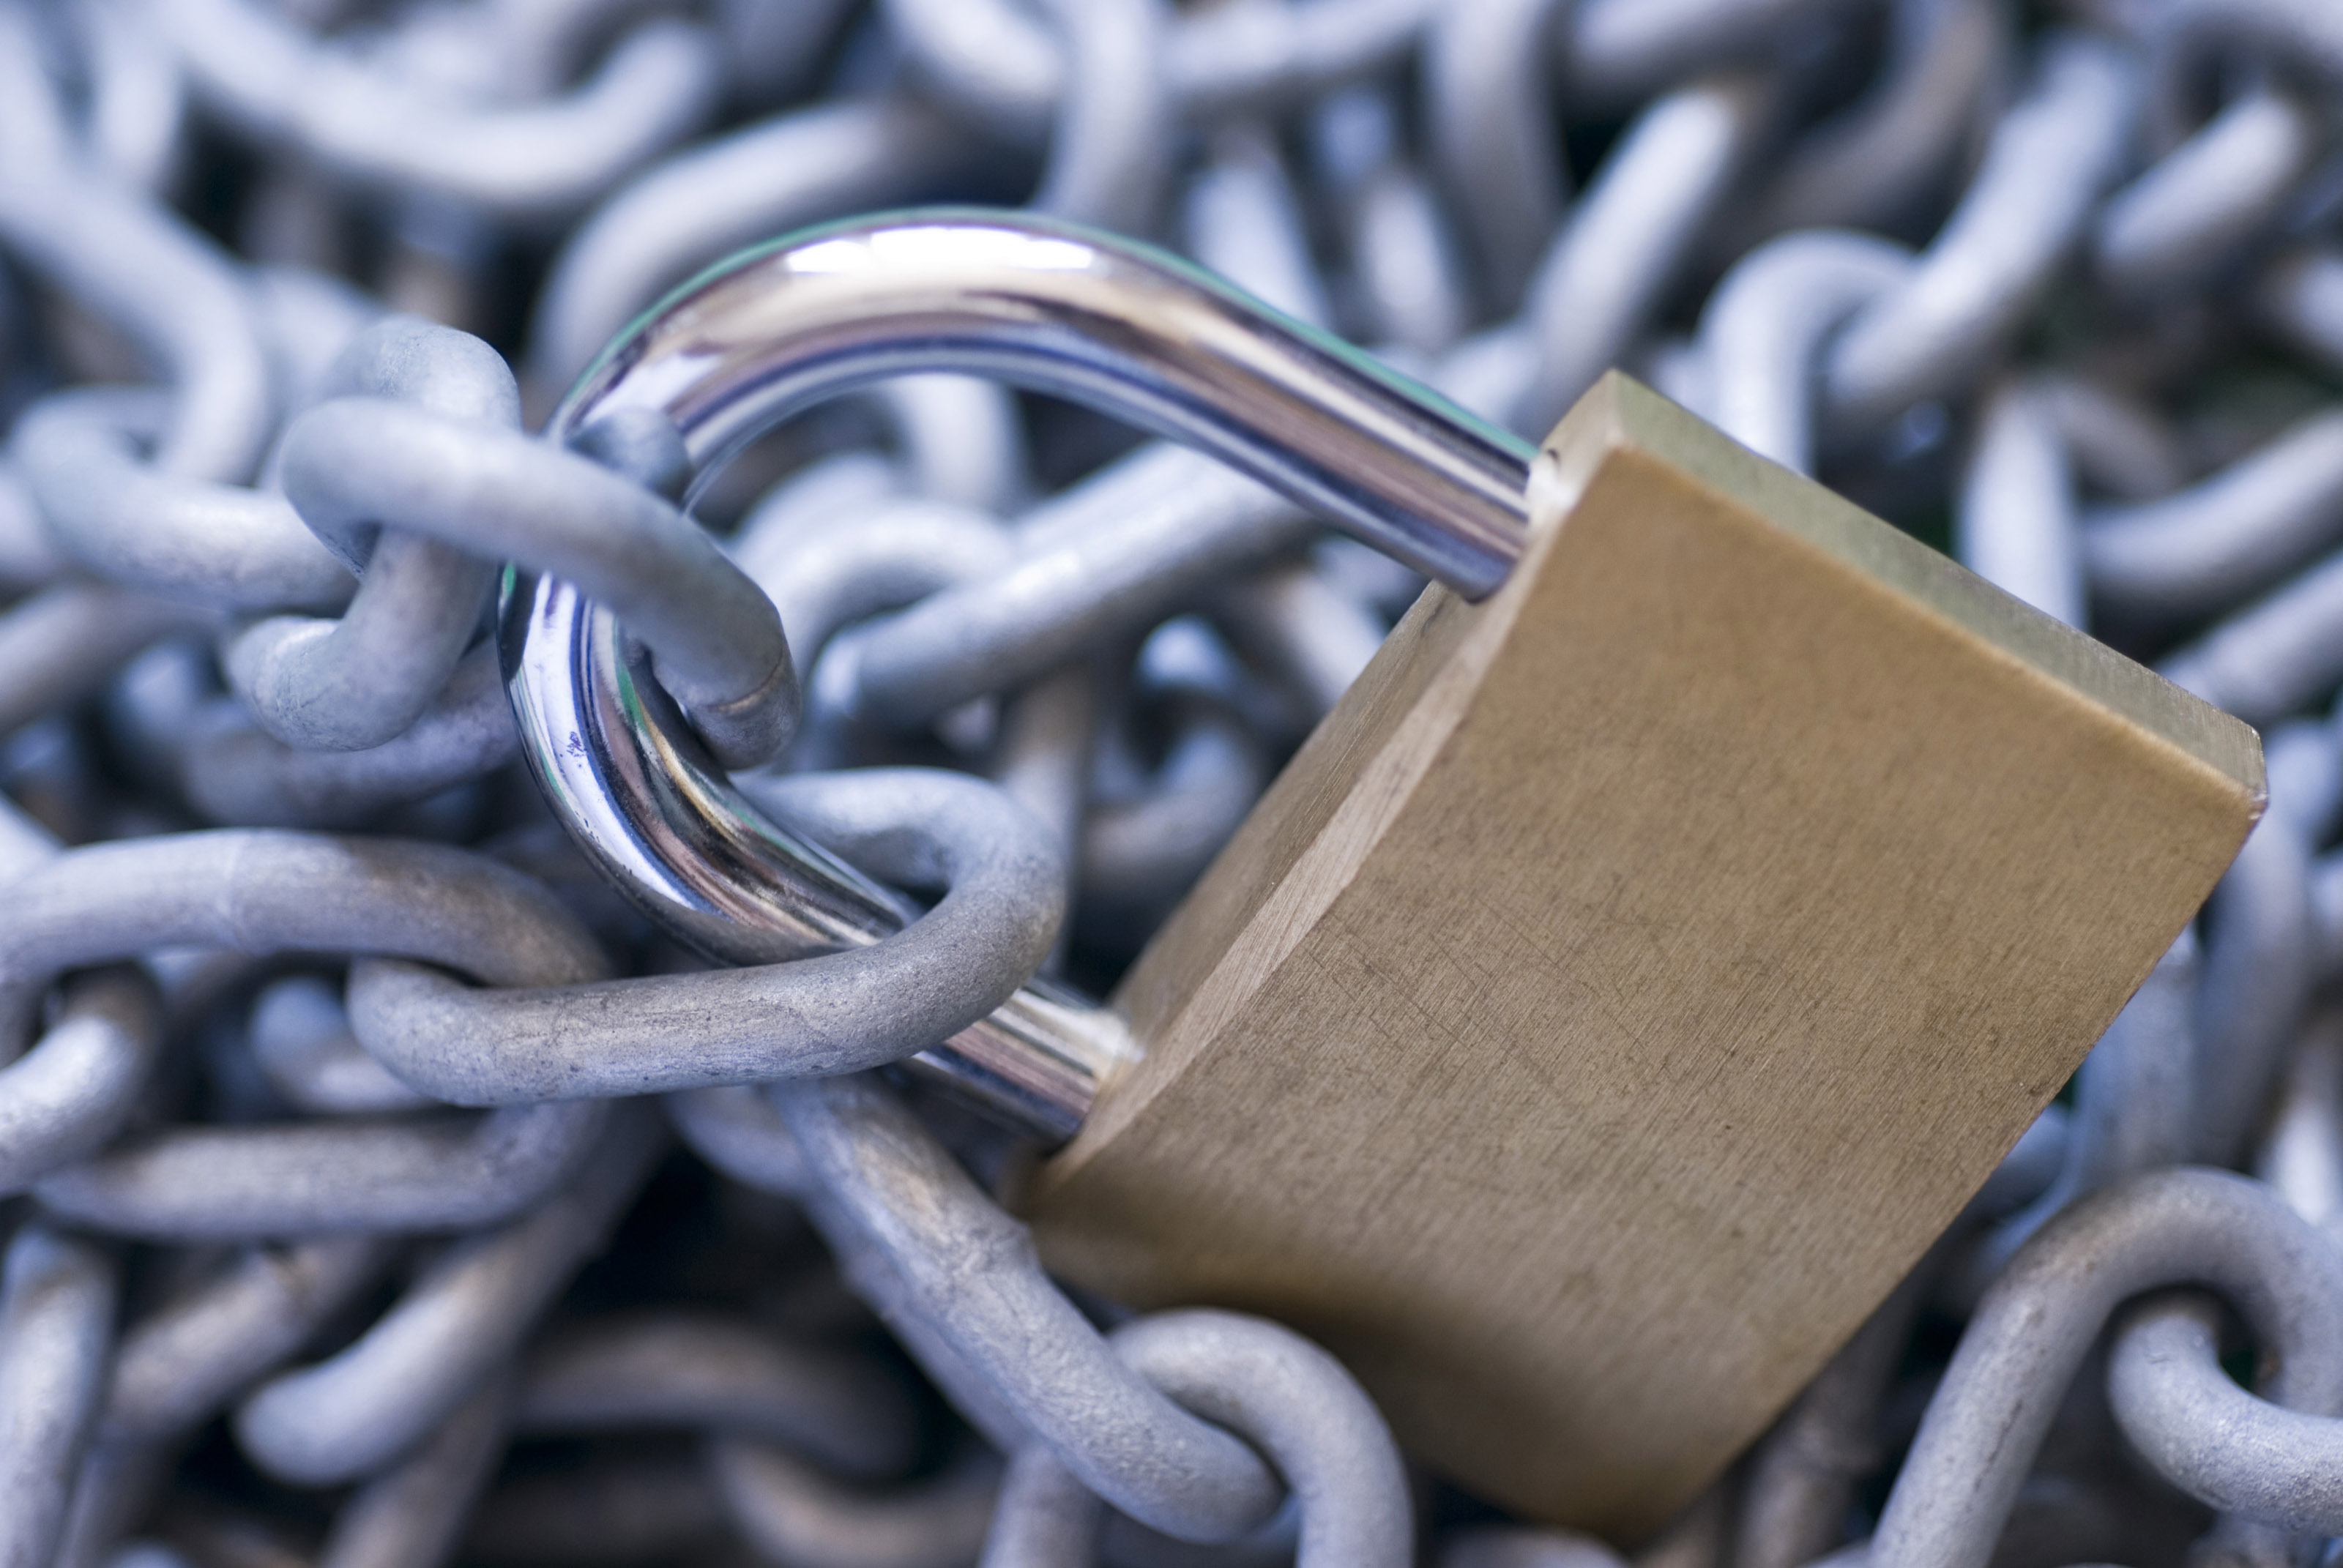 Lock and chain-4113 | Stockarch Free Stock Photos